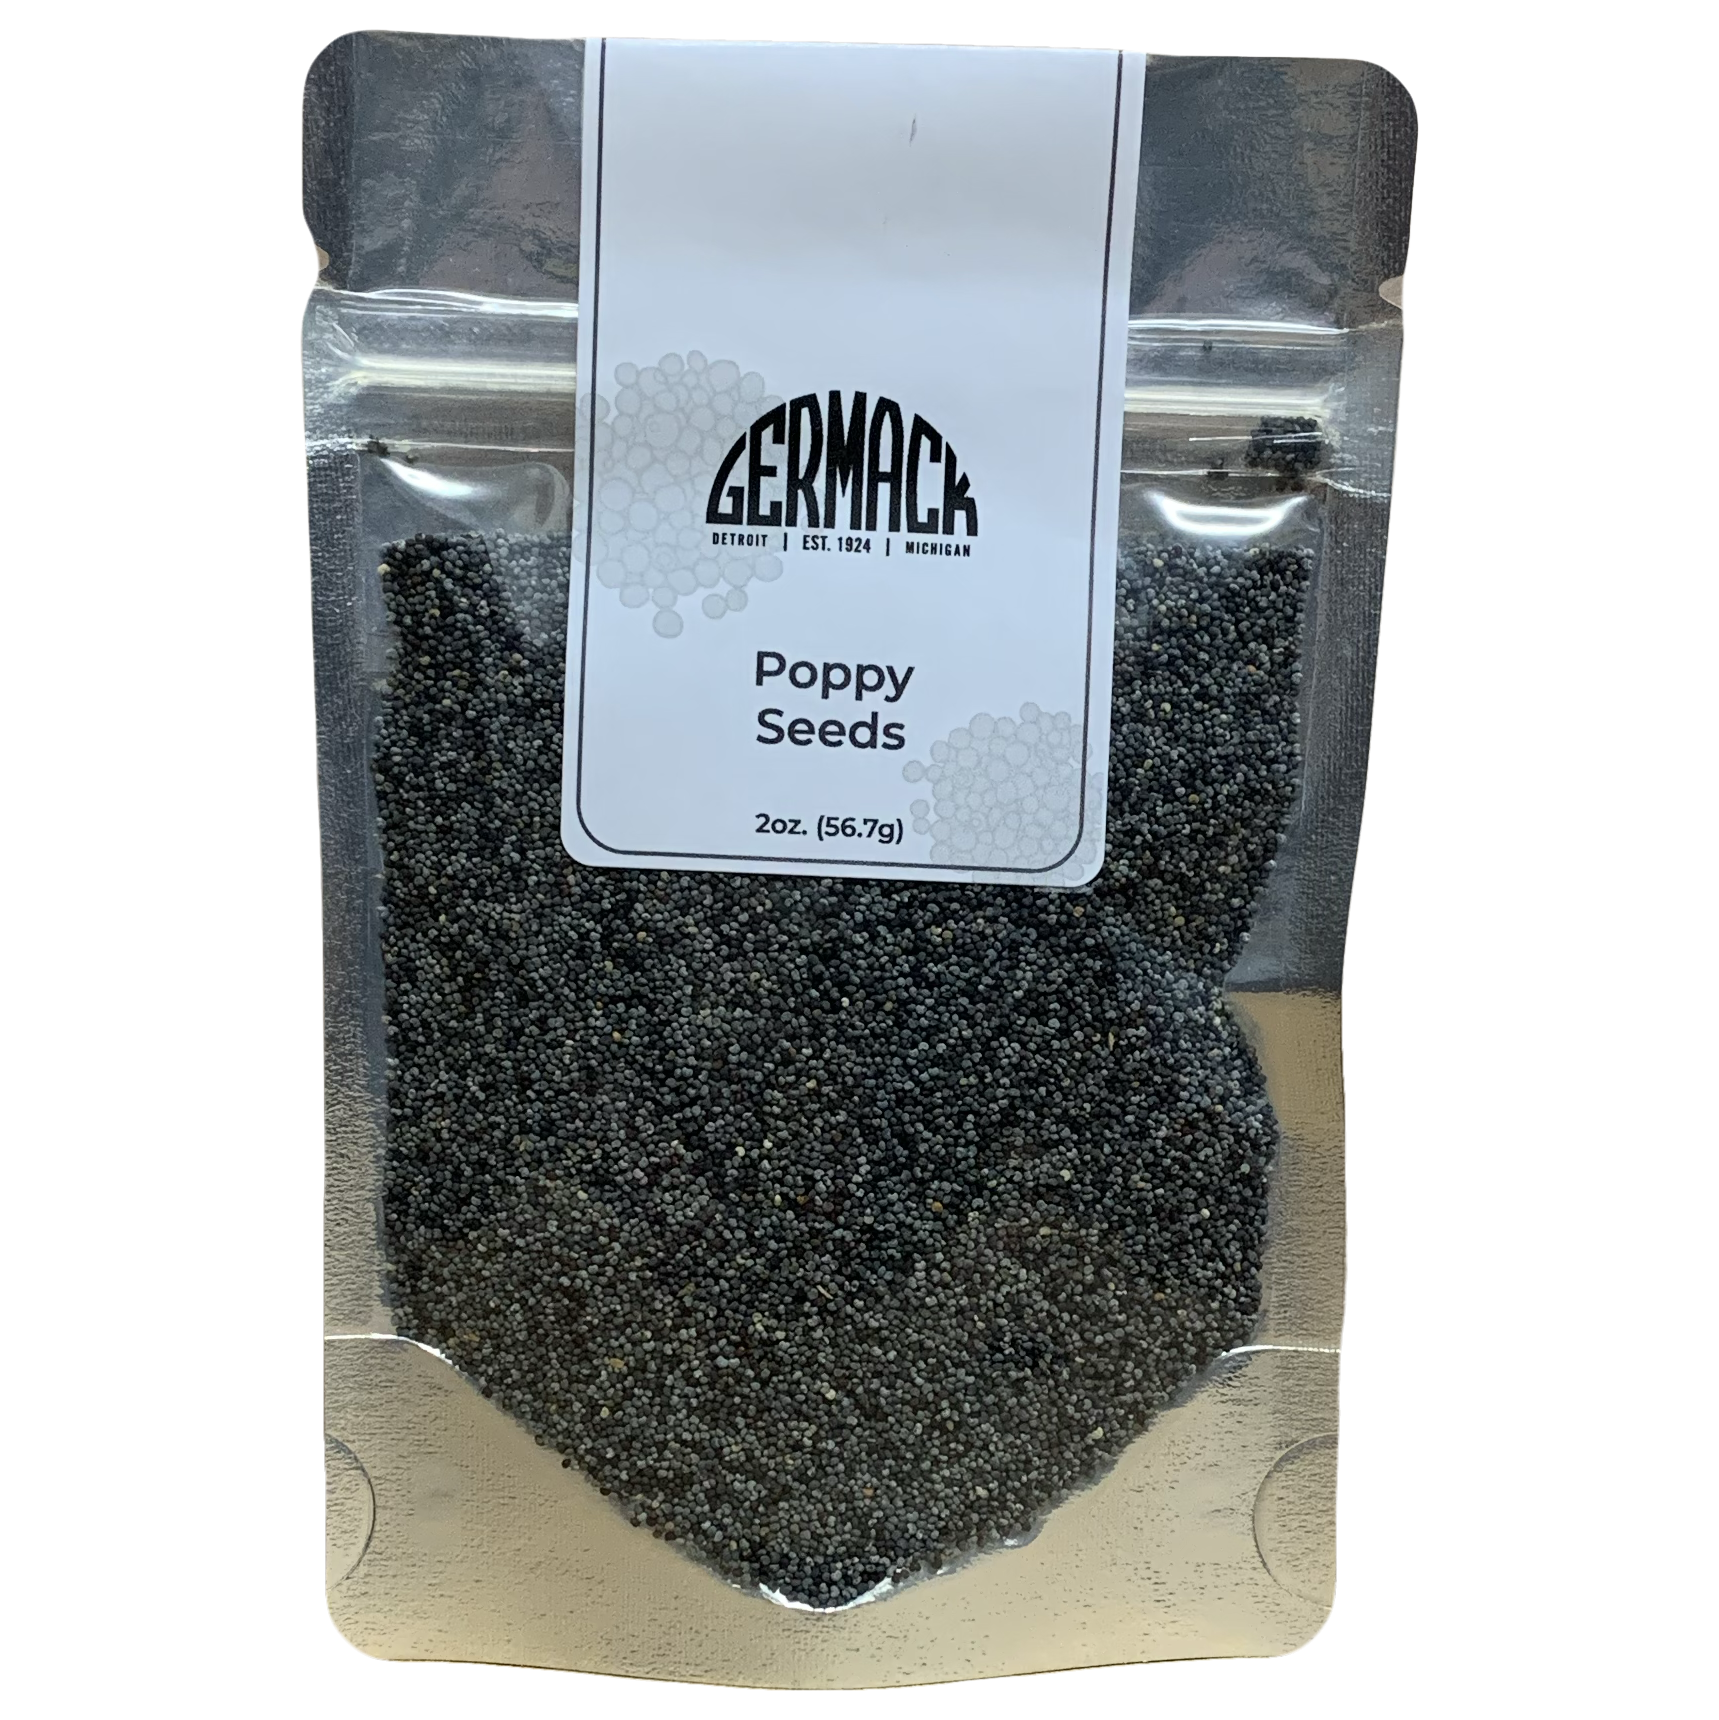 Picture Poppy Seeds (Whole), 2oz